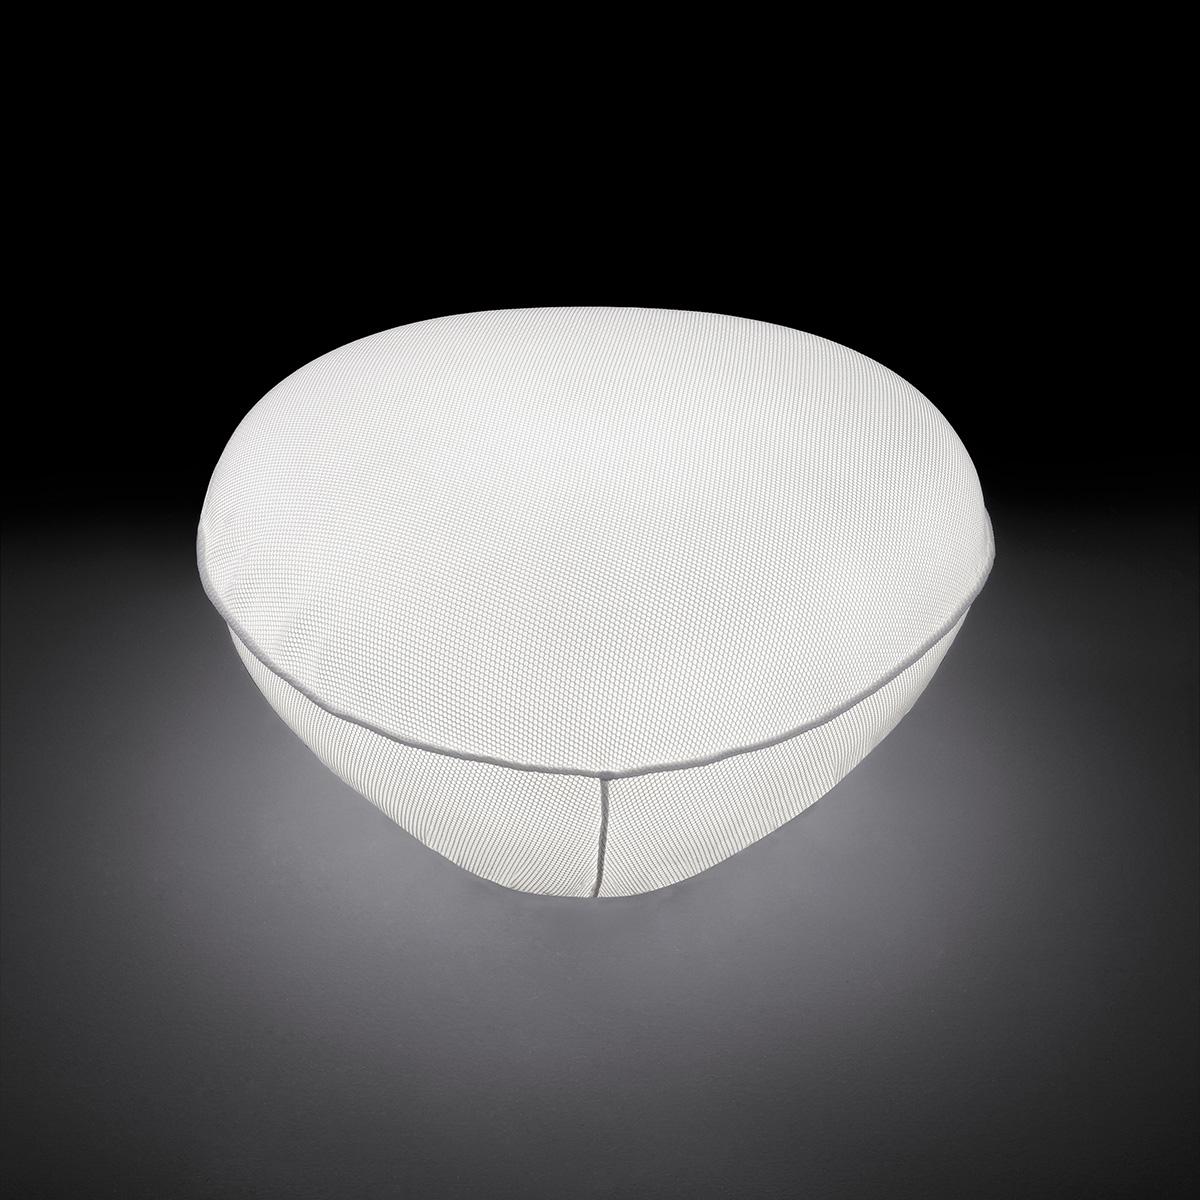 Outdoor lamp 'Pill-Low' designed by Francesco Rota in 2011. Outdoor/indoor LED lamp in white polyethylene with cover in outdoor washable fabric. To be used as seat as well. Manufactured by Oluce, Italy.

With Pill-low, Francesco Rota combines the